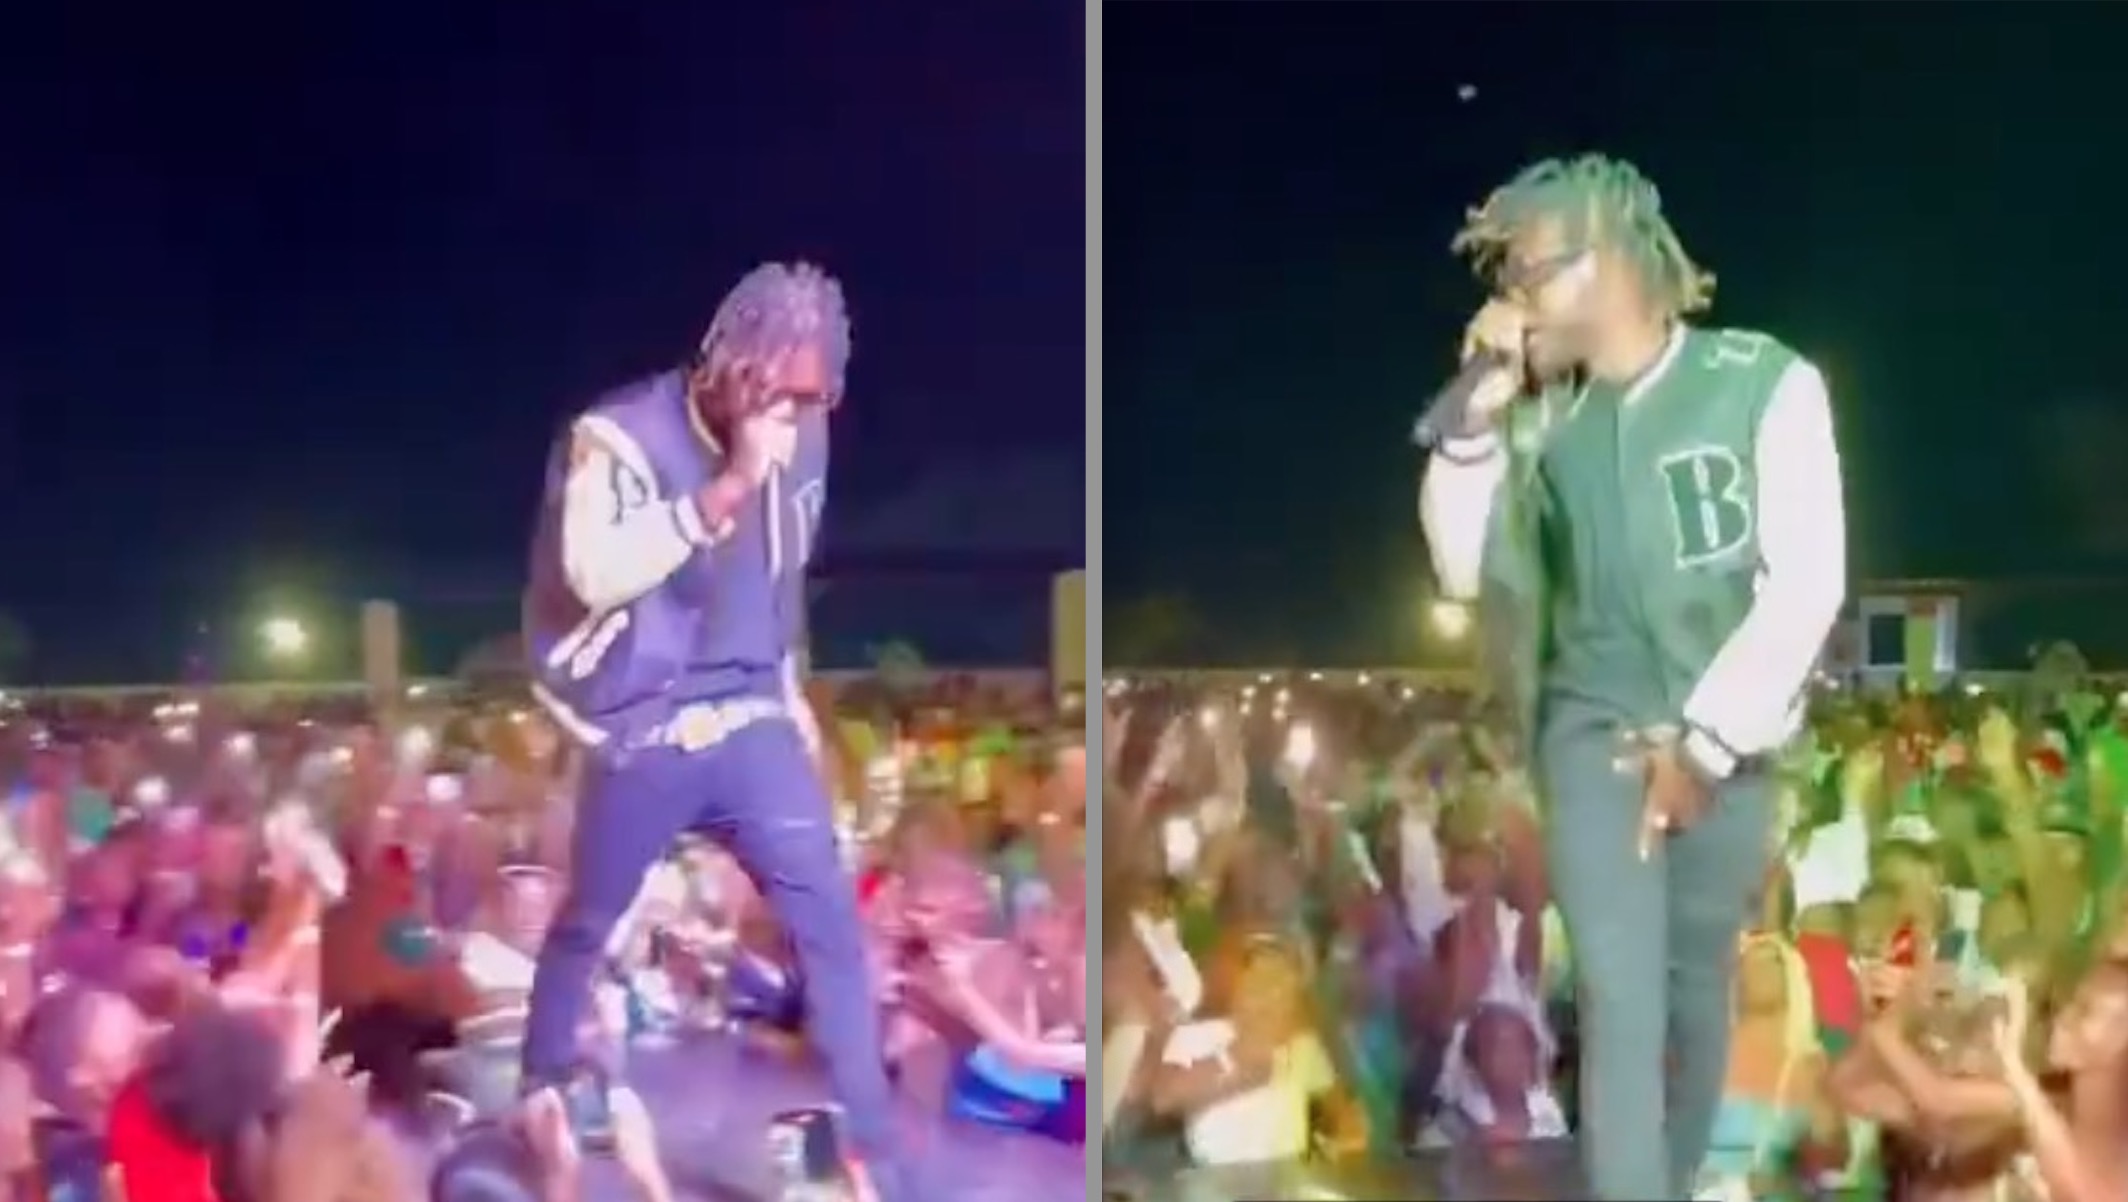 Brysco Had Female Fans Going Wild During Latest Performance - Watch Video